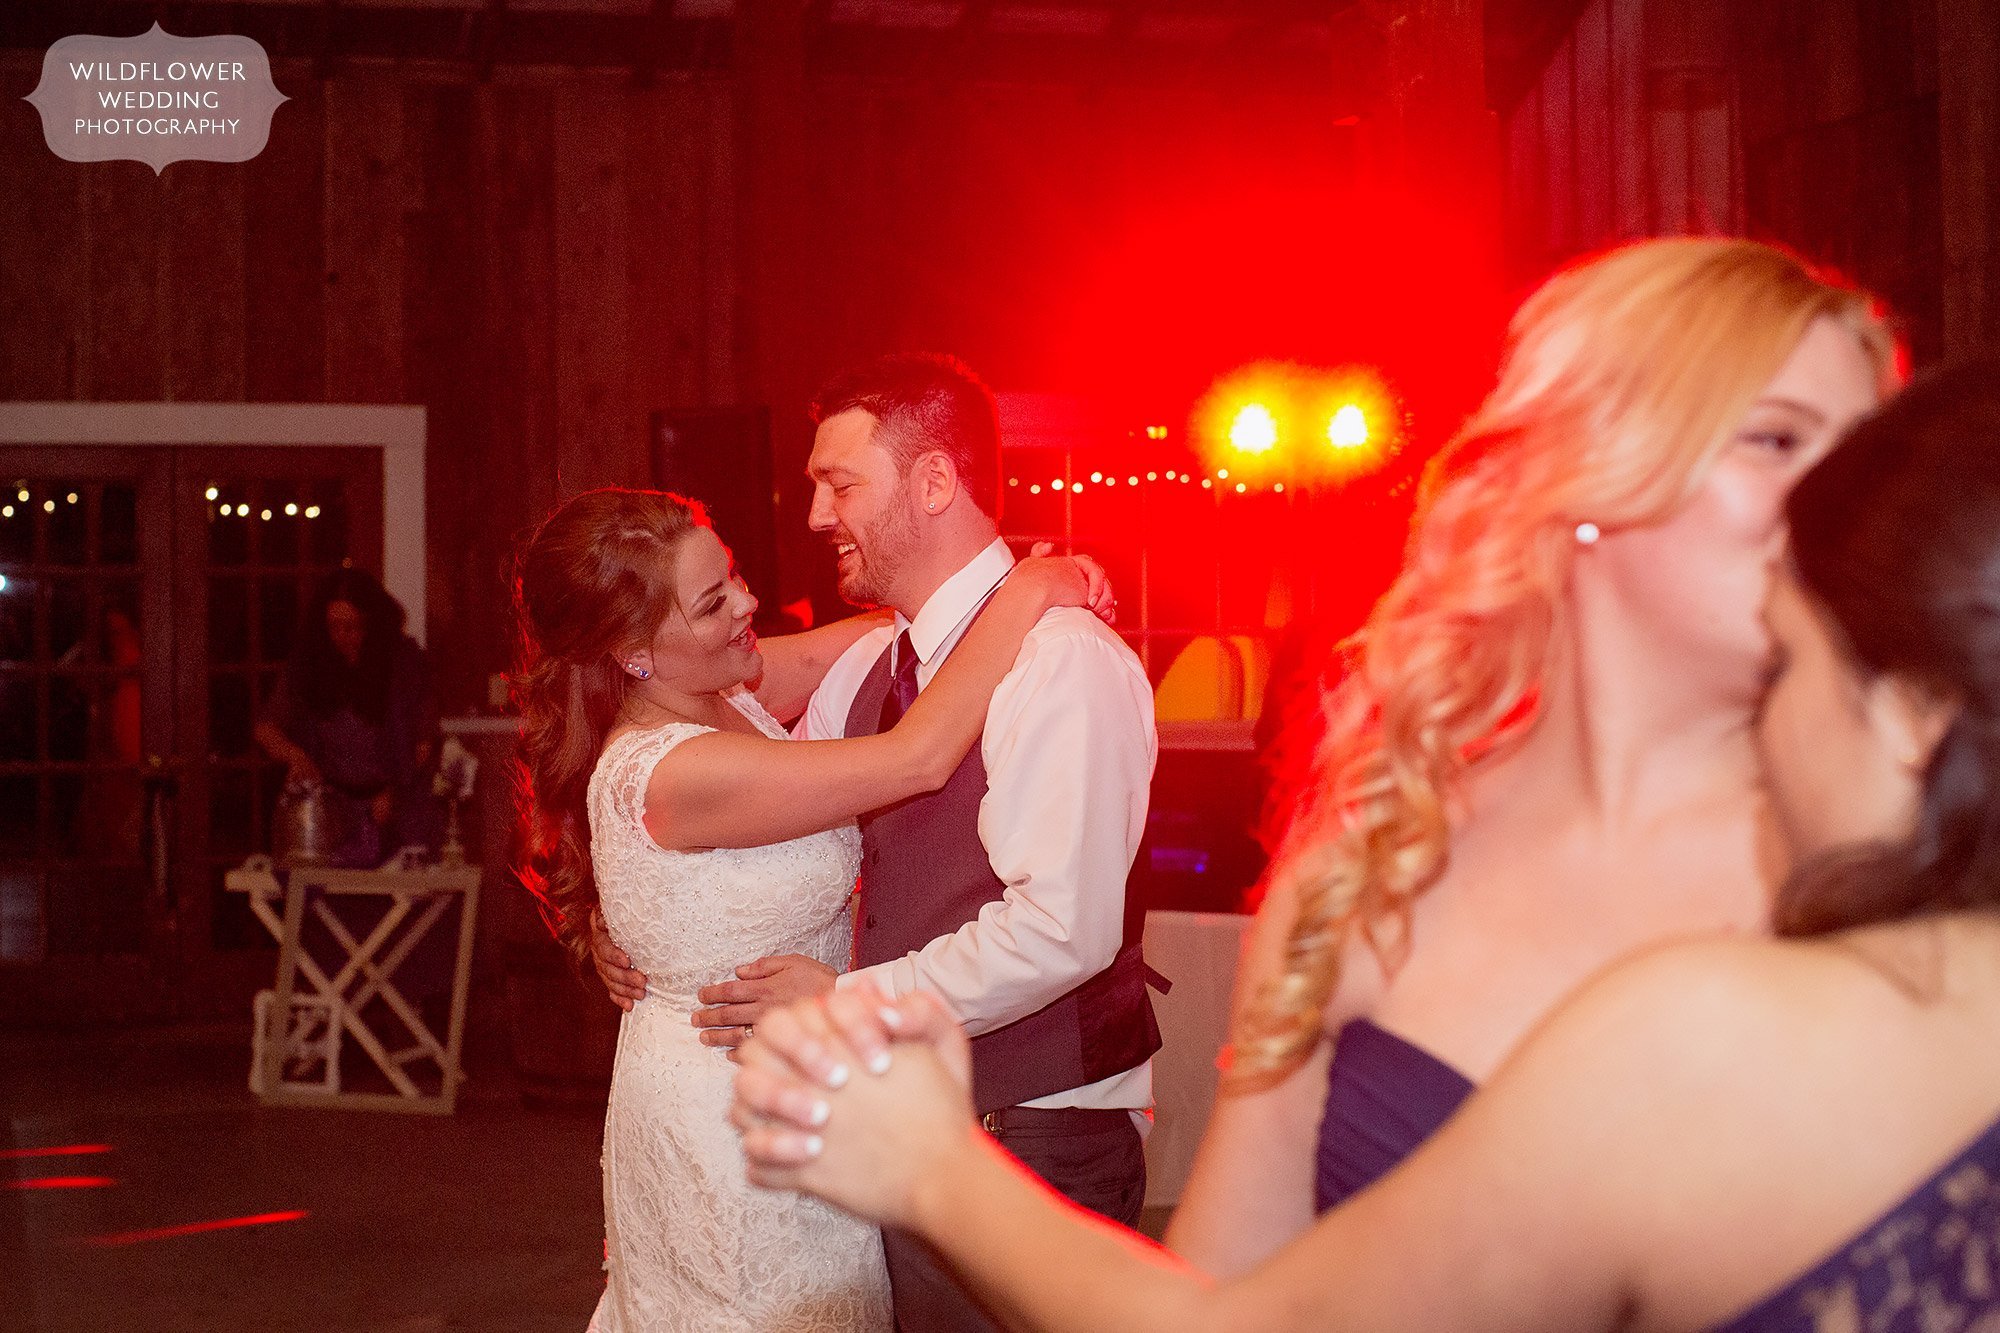 Artistic photo of the bride and groom on the dance floor at this rustic barn wedding north of KC.